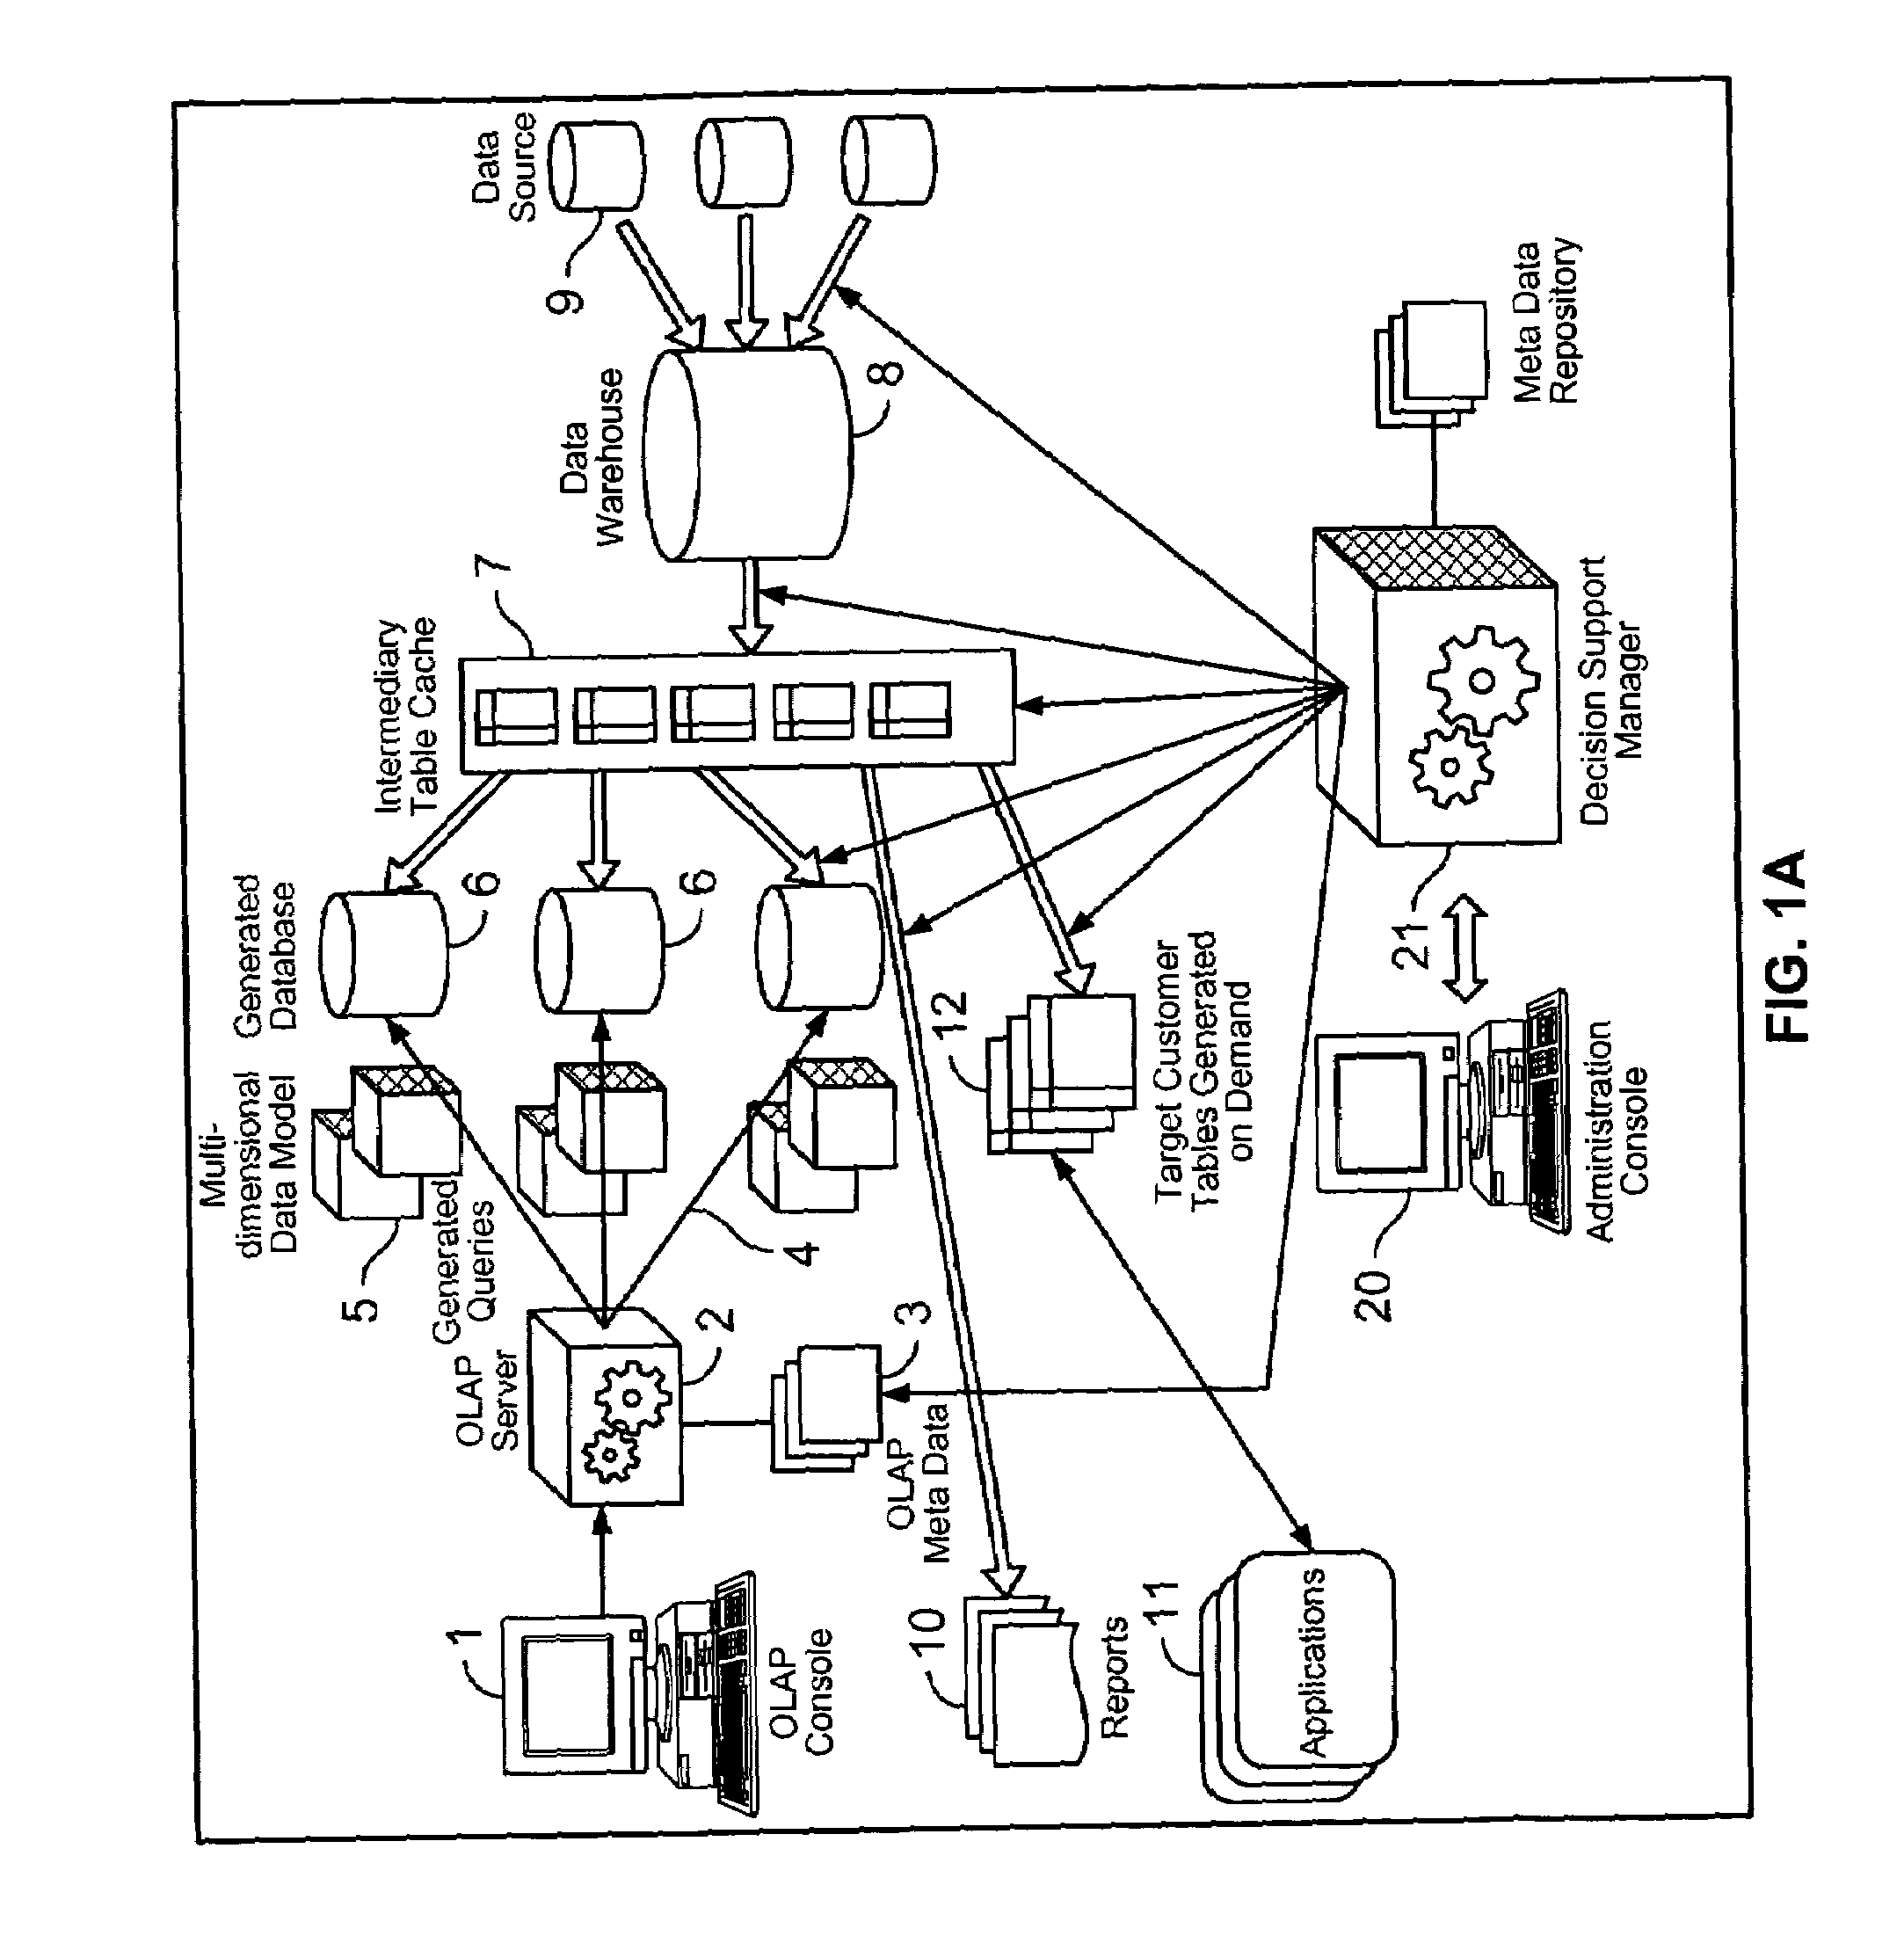 Apparatus for visualizing information in a data warehousing environment